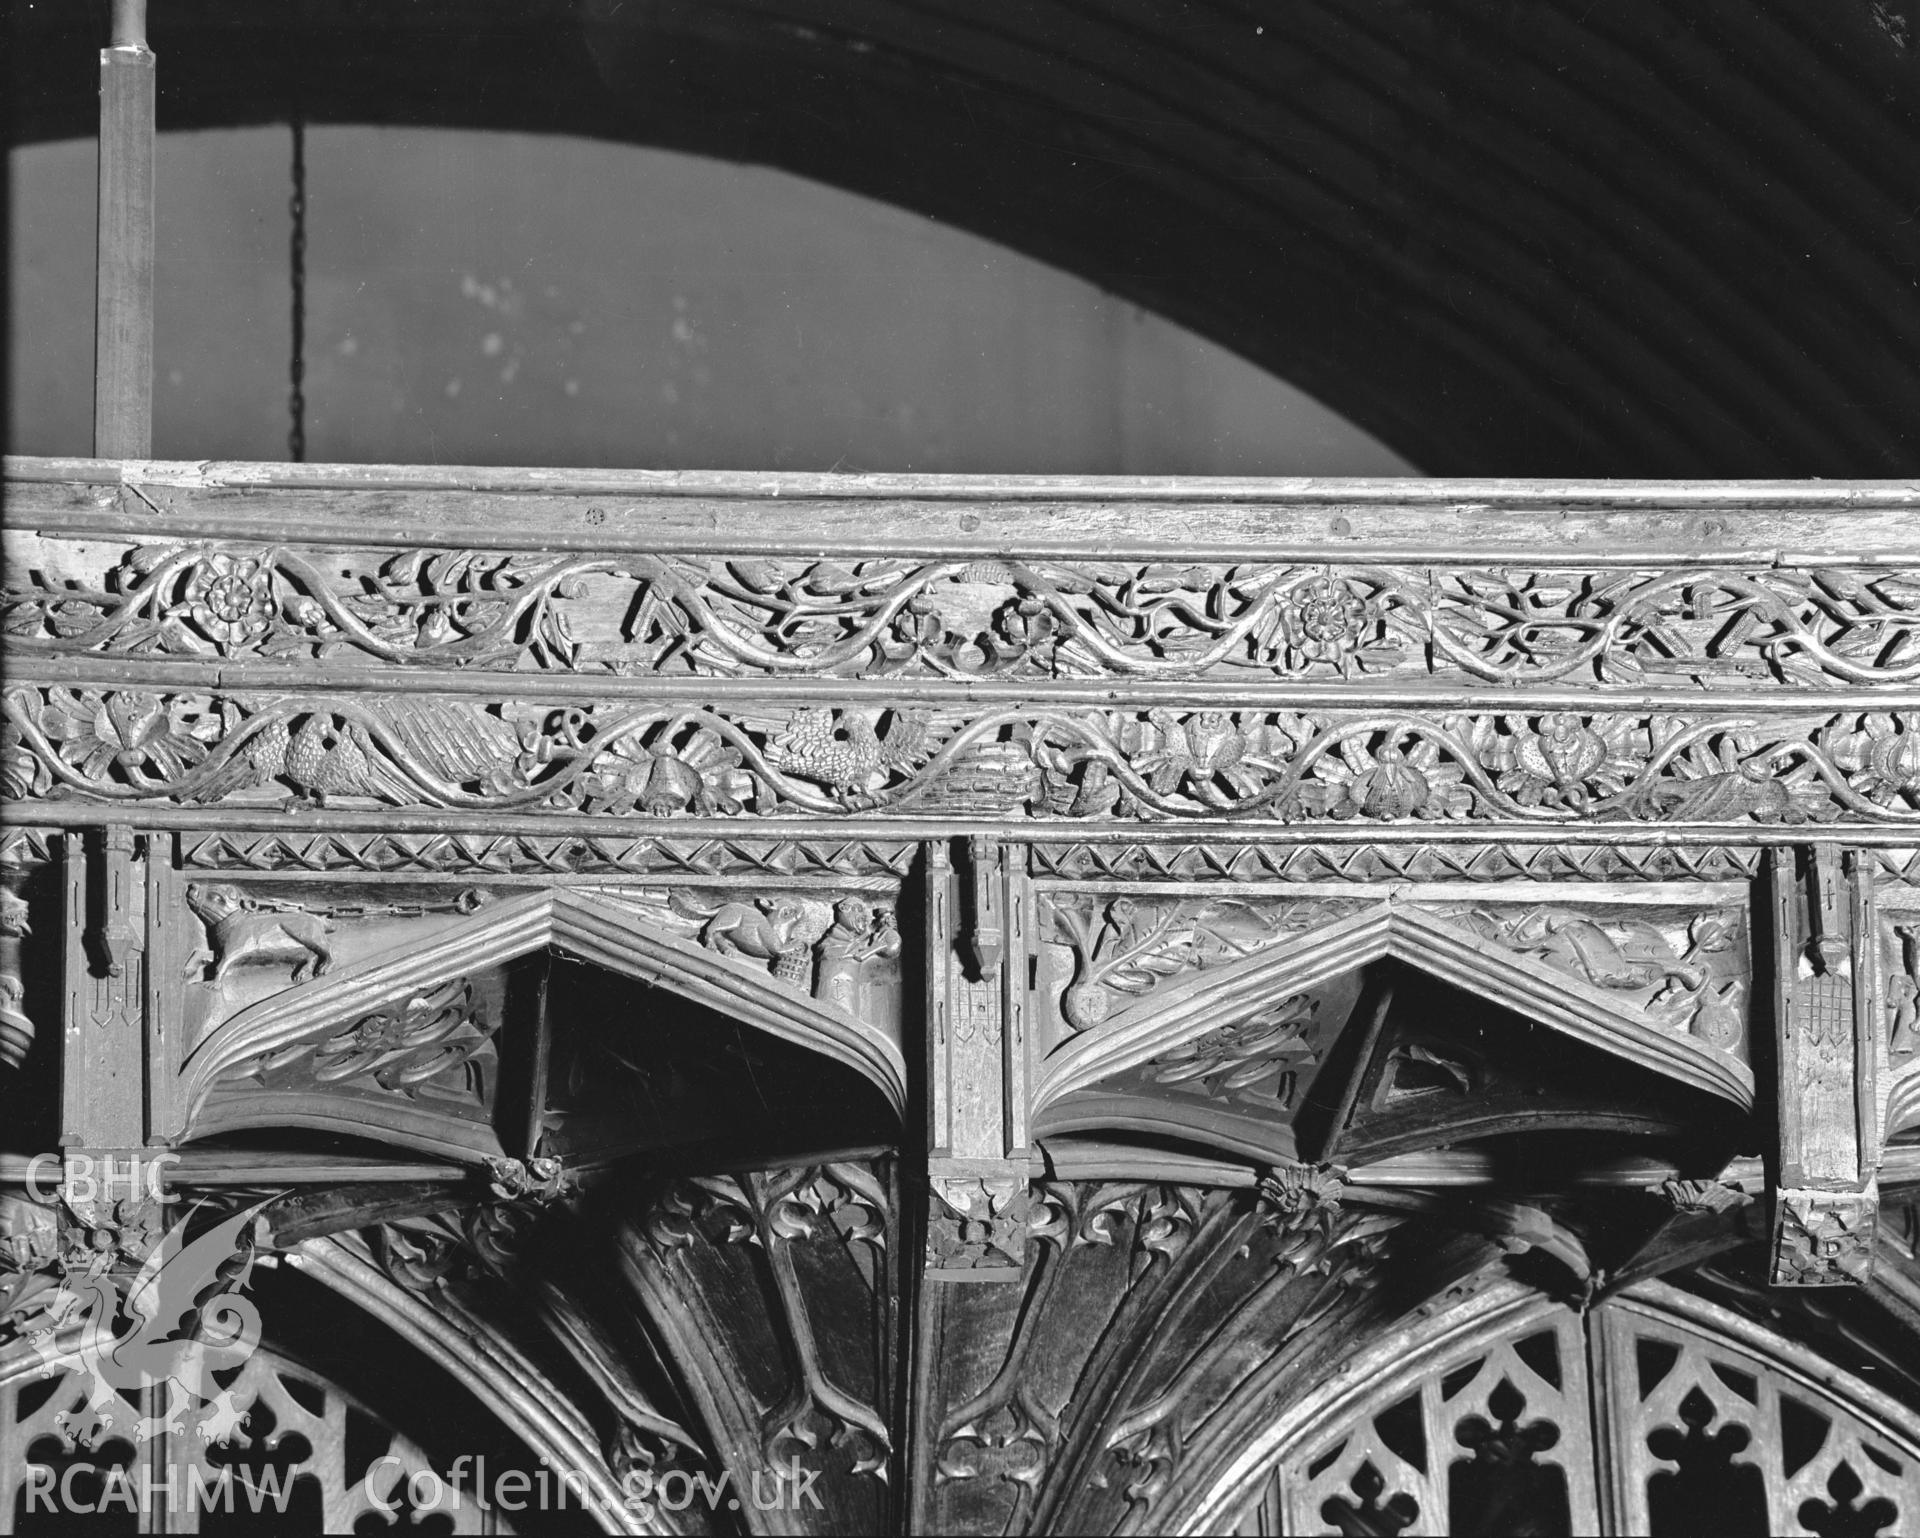 Interior view of St Marys Church Conwy showing screen detail, taken in 10.09.1951.